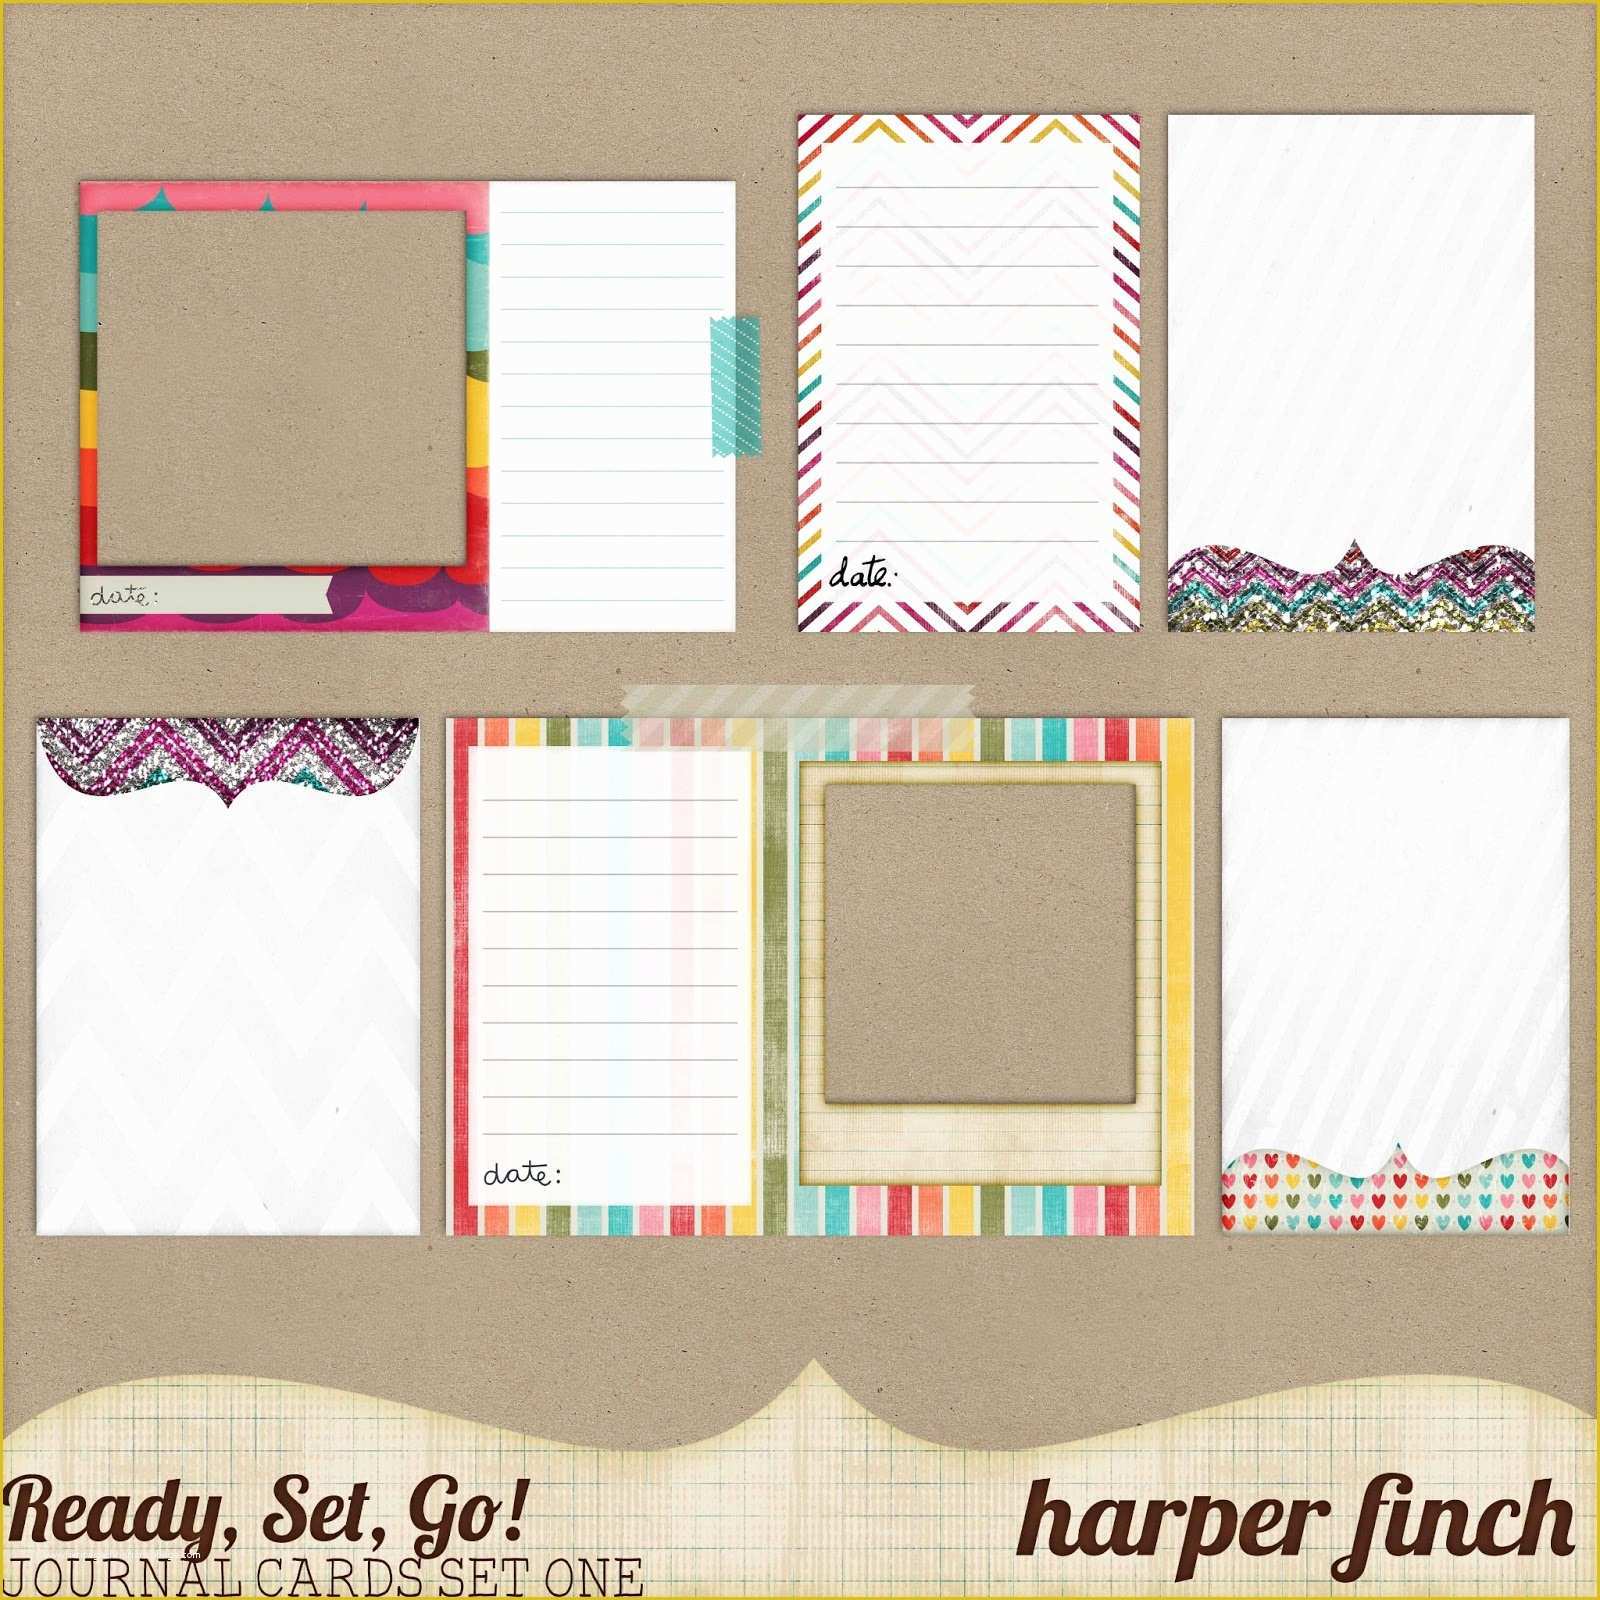 Free Project Life Templates Of Free Project Life Journaling Card Set &amp; Frames – [ E